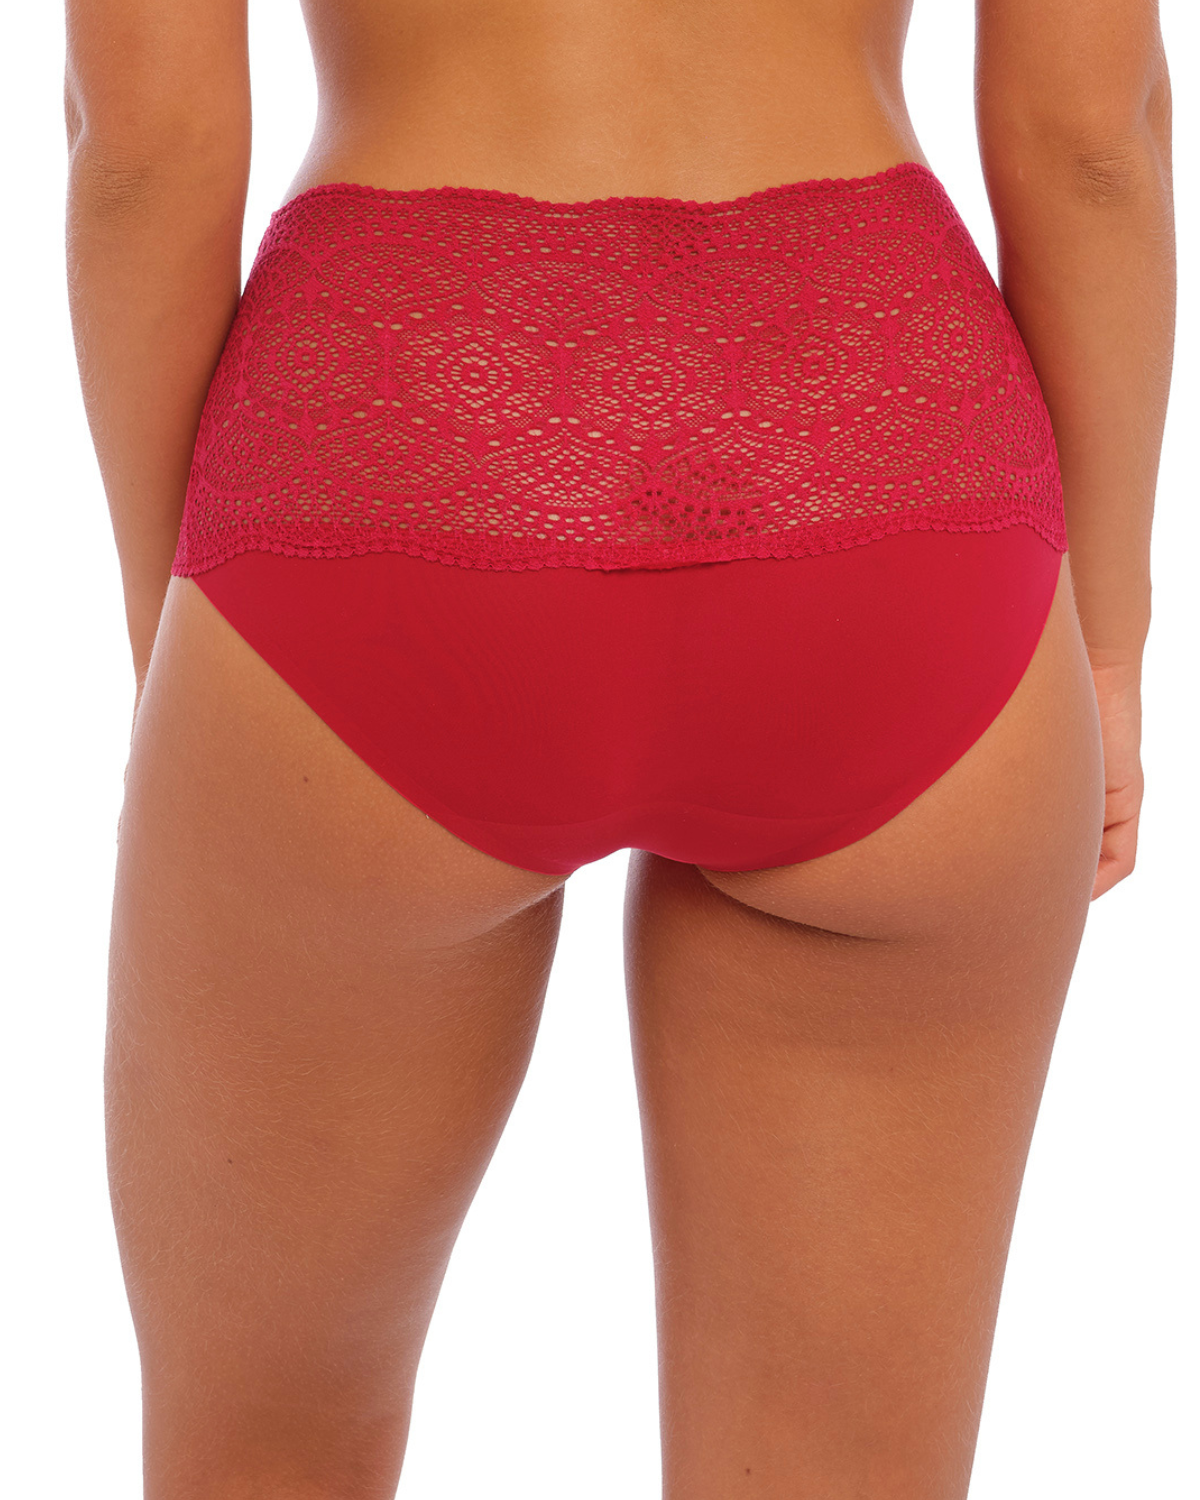 Model wearing a wide lace band brief panty in red